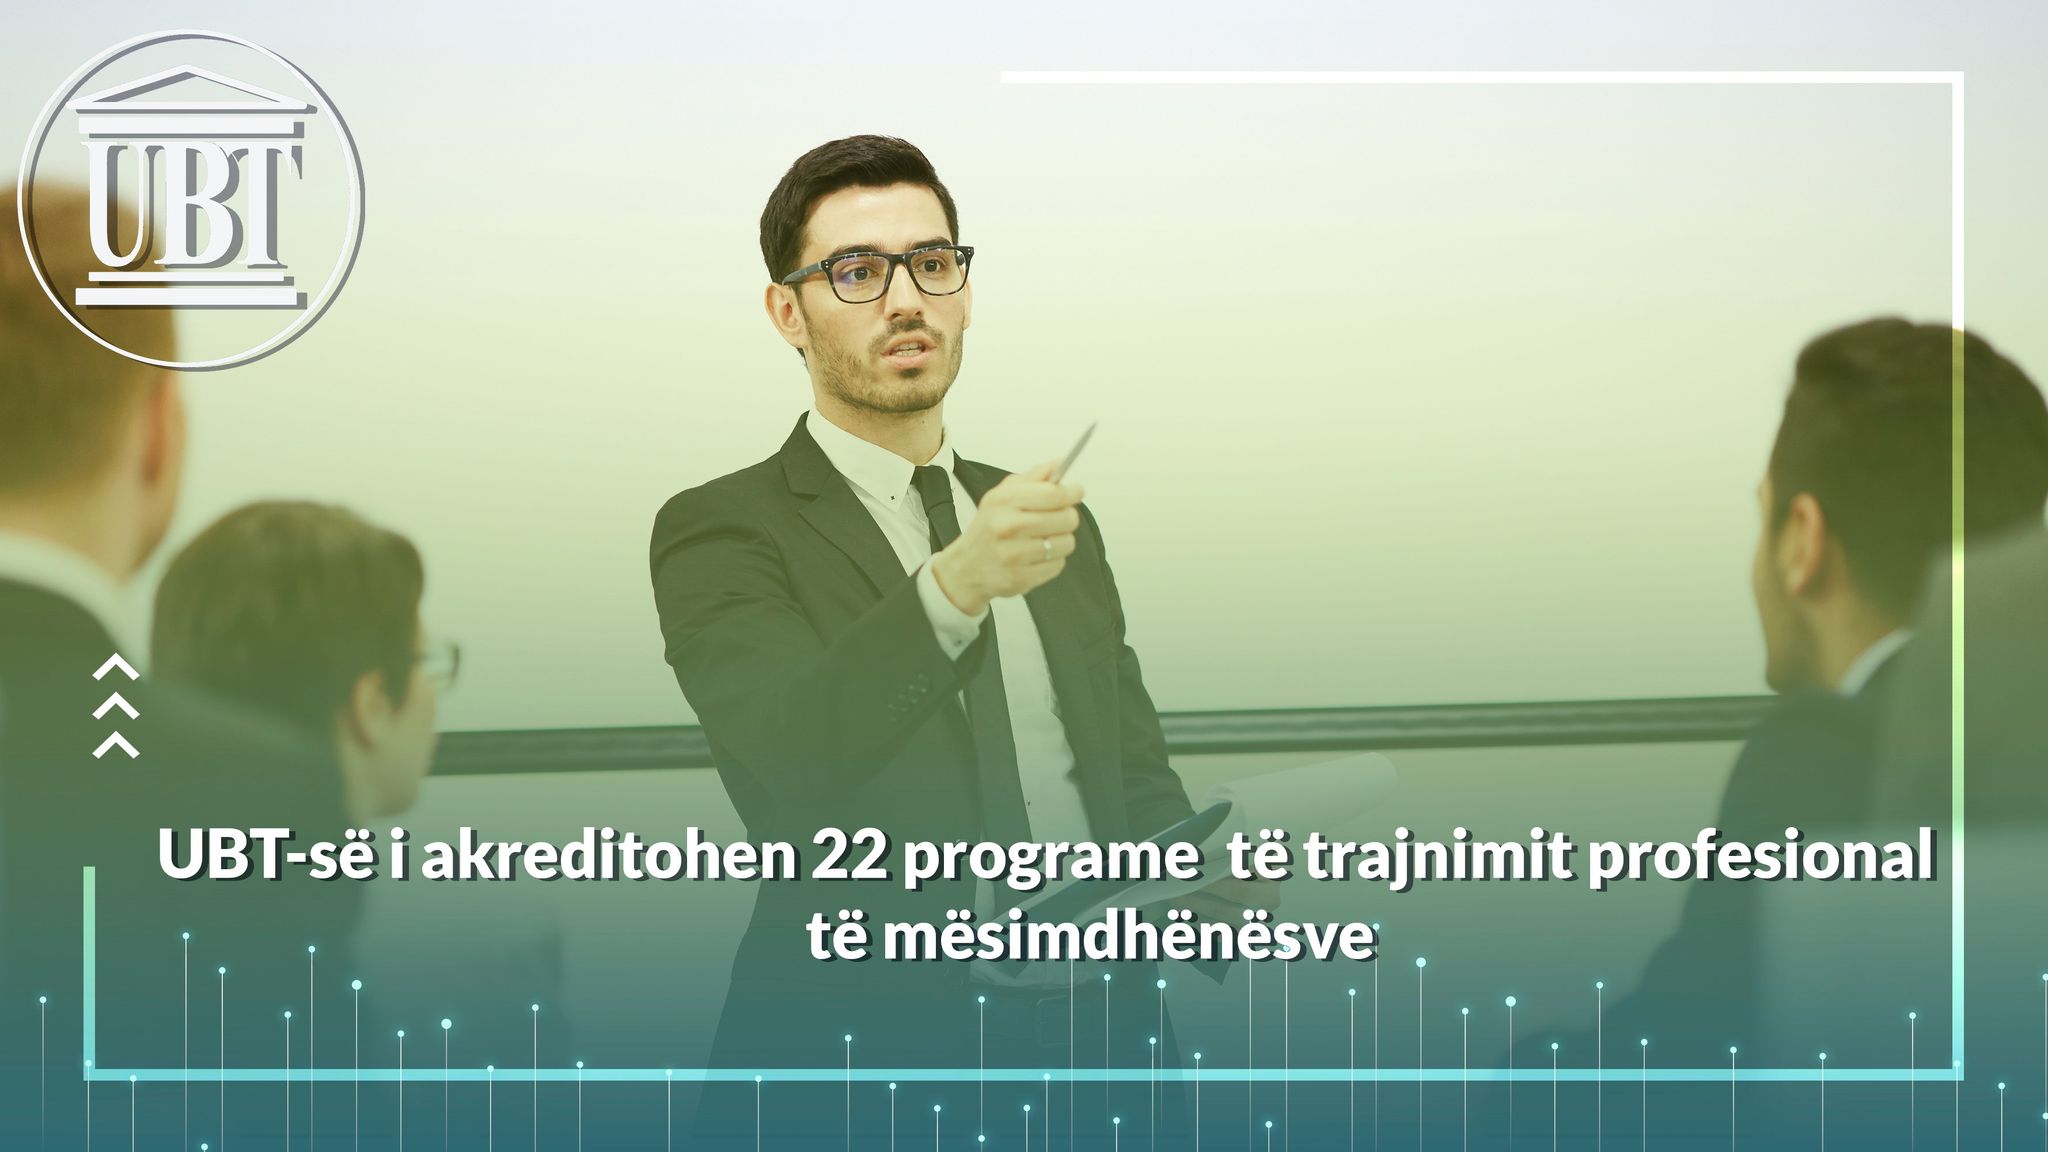 UBT was accredited in 22 professional vocational training programs